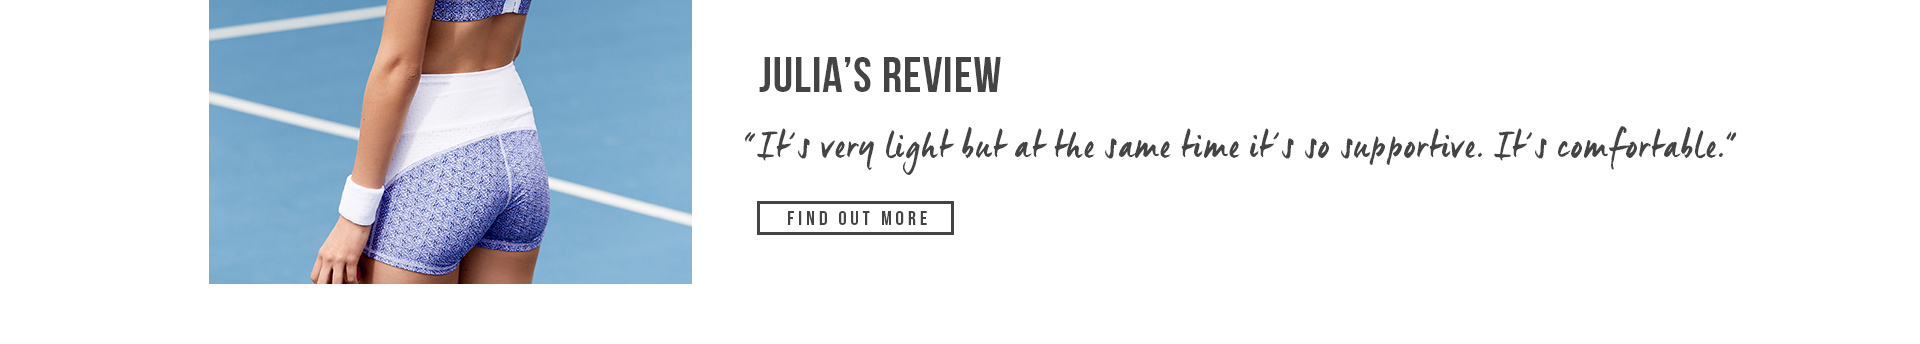 BODY | Julia Gardell's review of the high impact workout bra. Find Out More